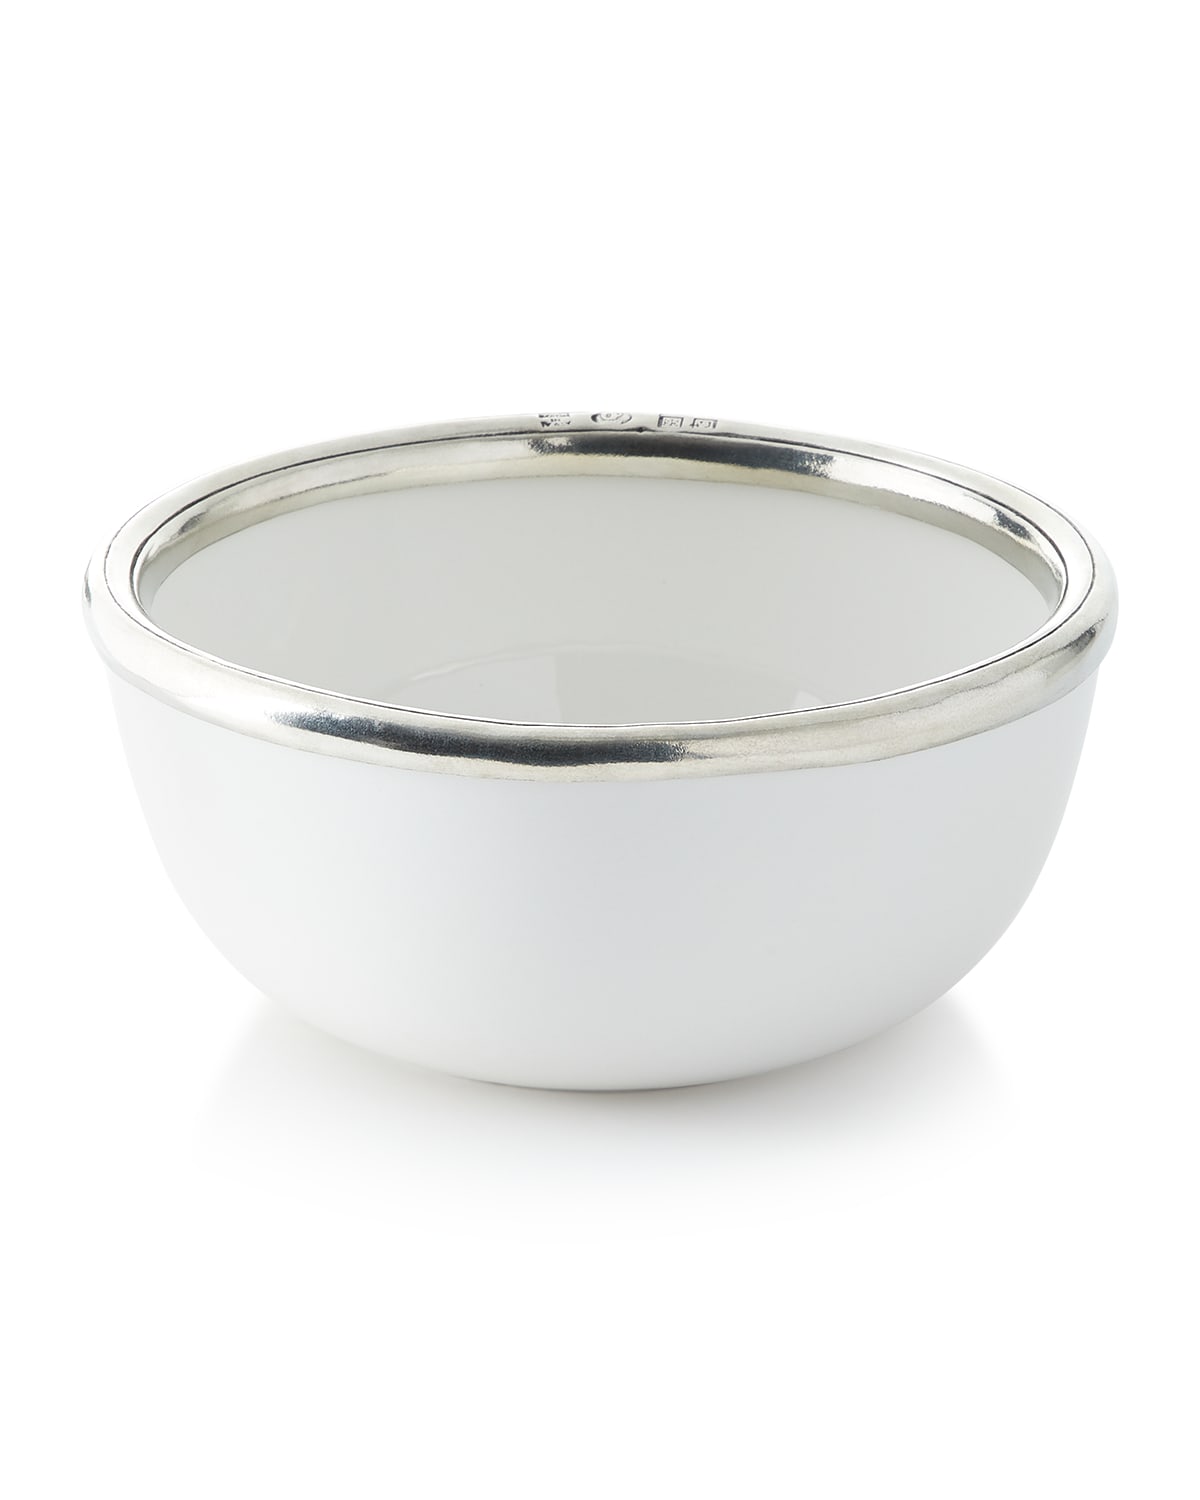 Neiman Marcus Pewter And Ceramic Cereal Bowl